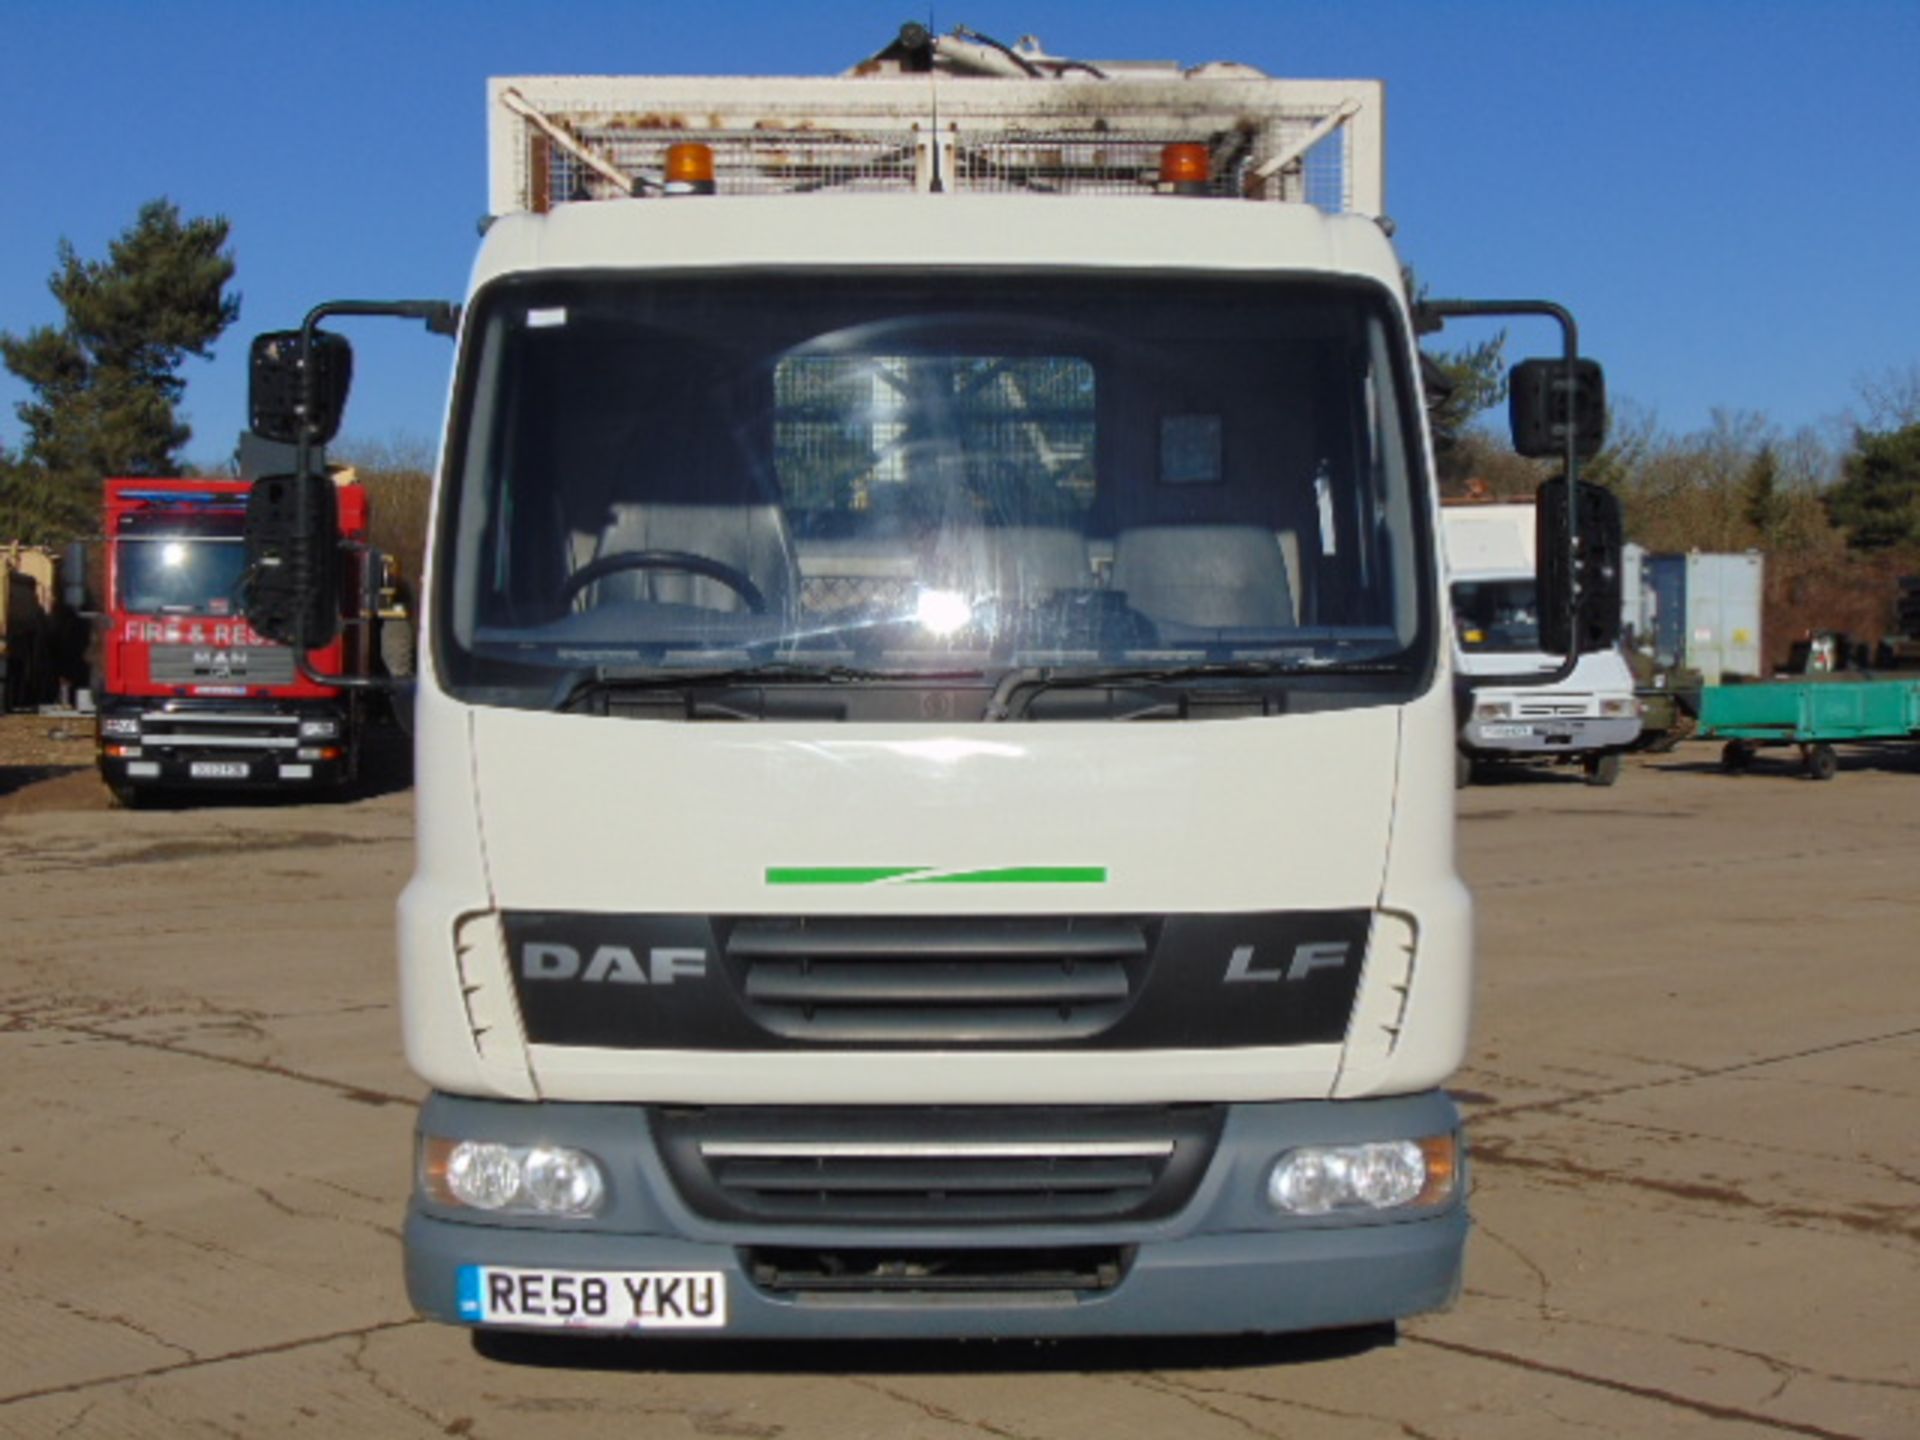 2008 DAF LF 45.140 C/W Refuse Cage, Rear Tipping Body and Side Bin Lift - Image 5 of 26